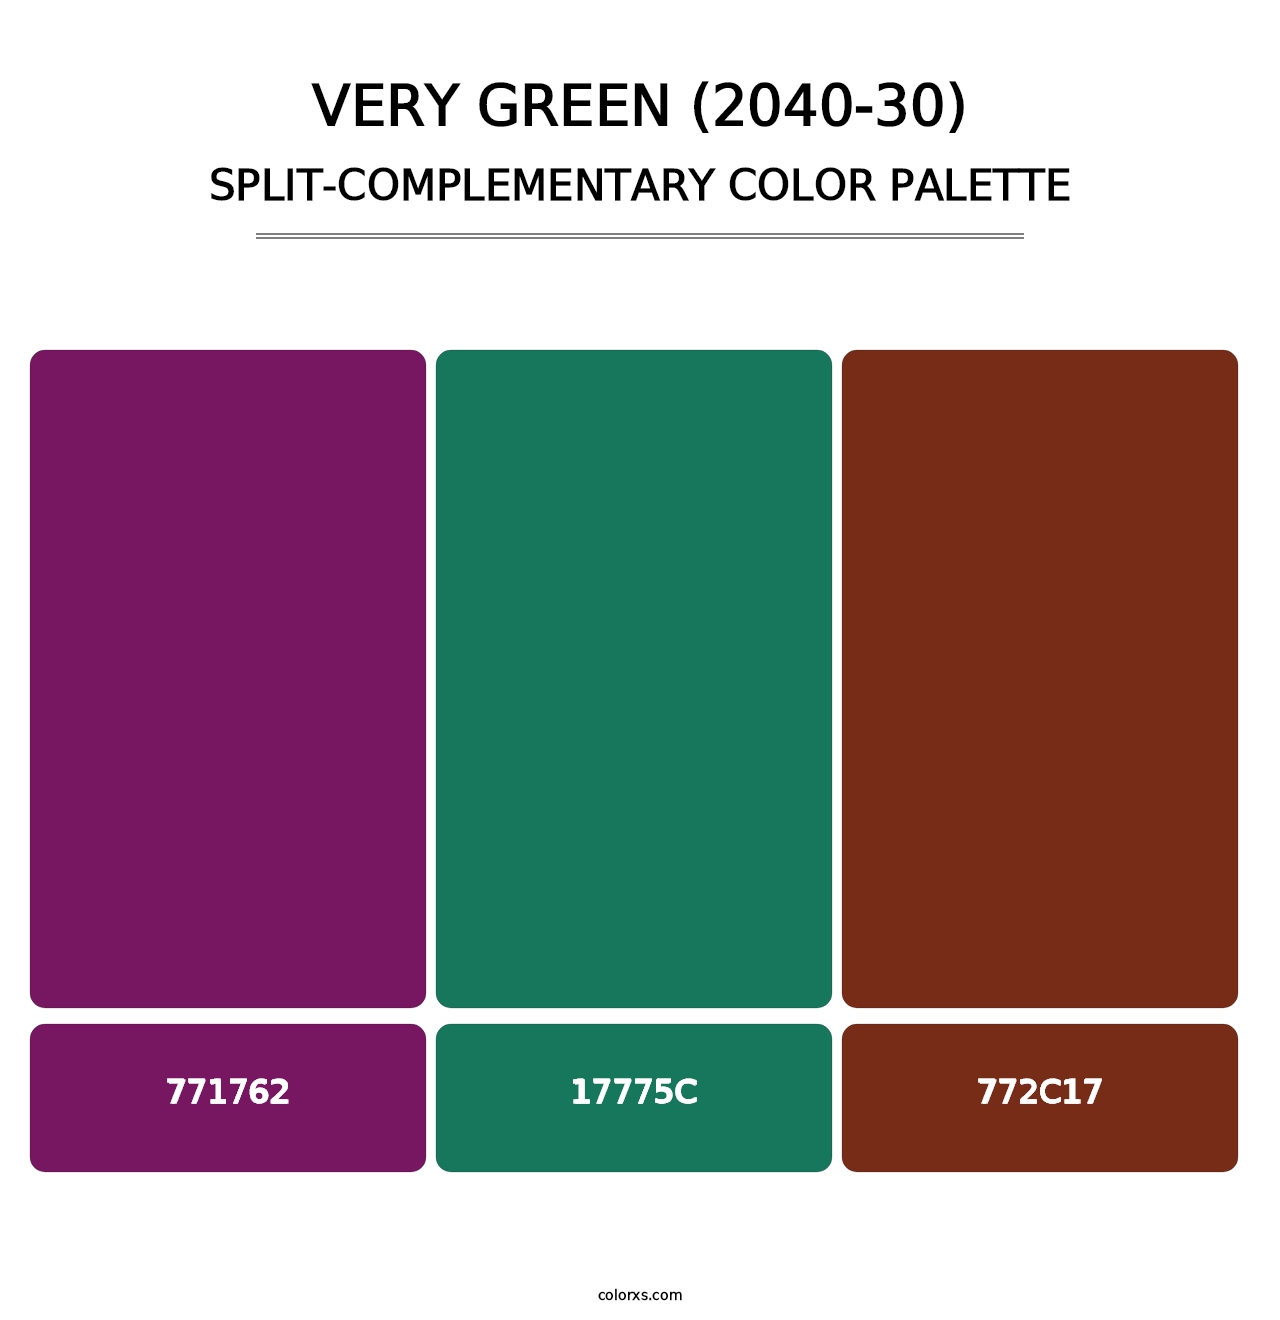 Very Green (2040-30) - Split-Complementary Color Palette